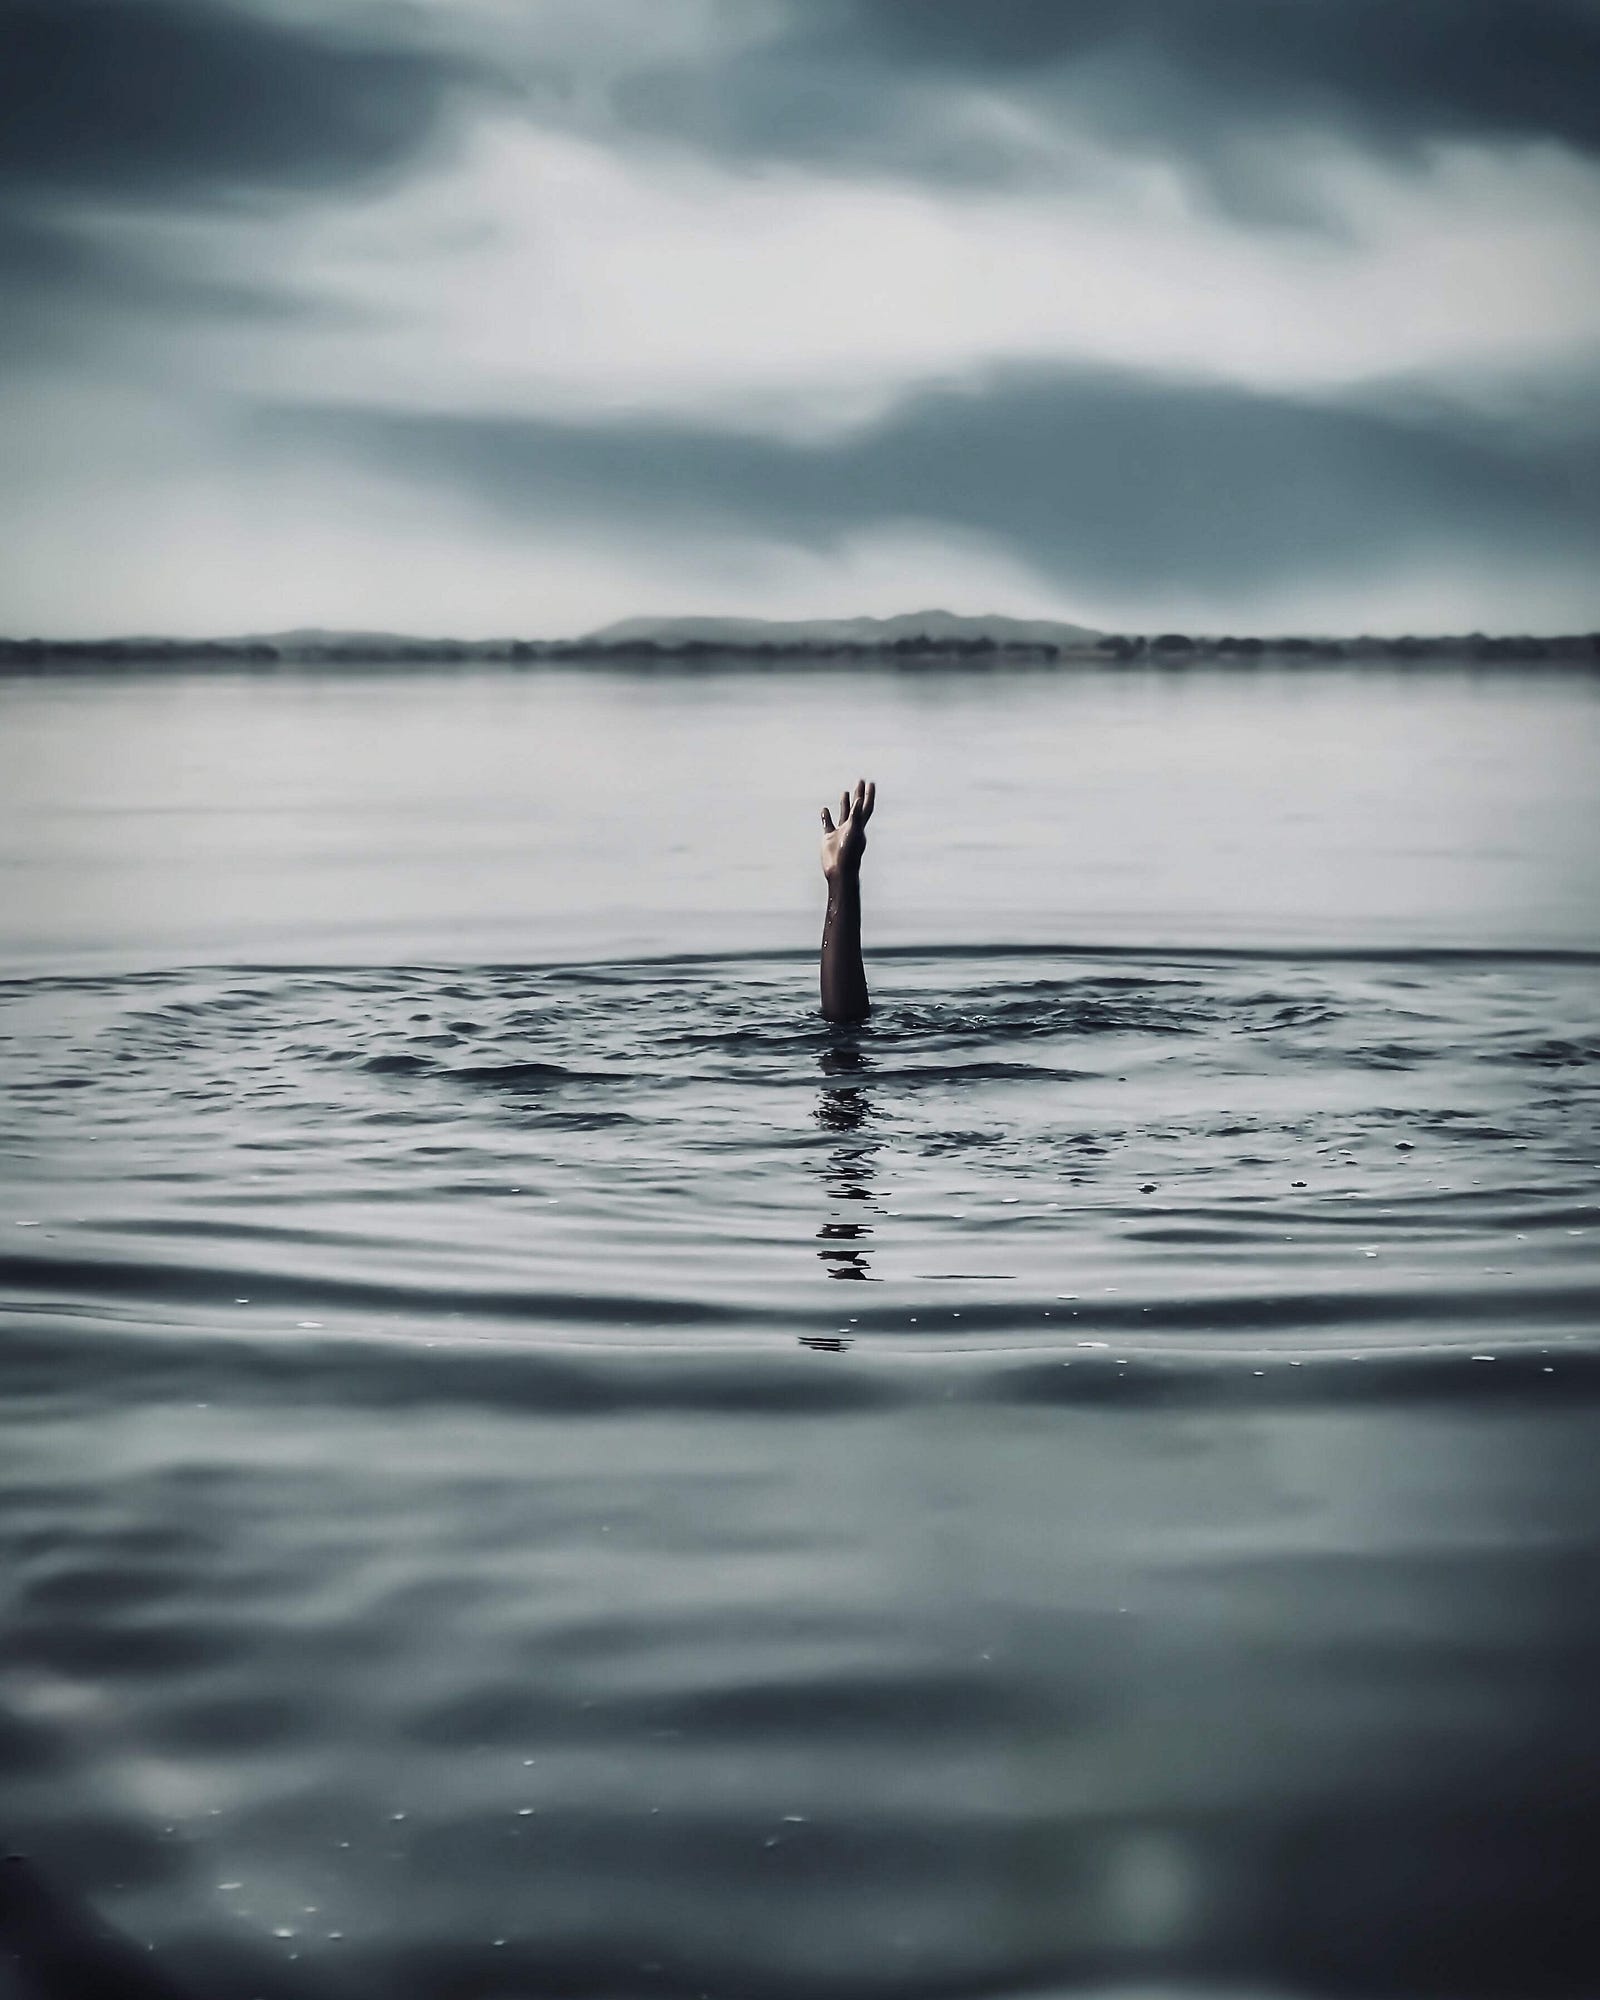 a hand reaches out of a large body of water — probably they are drwoning